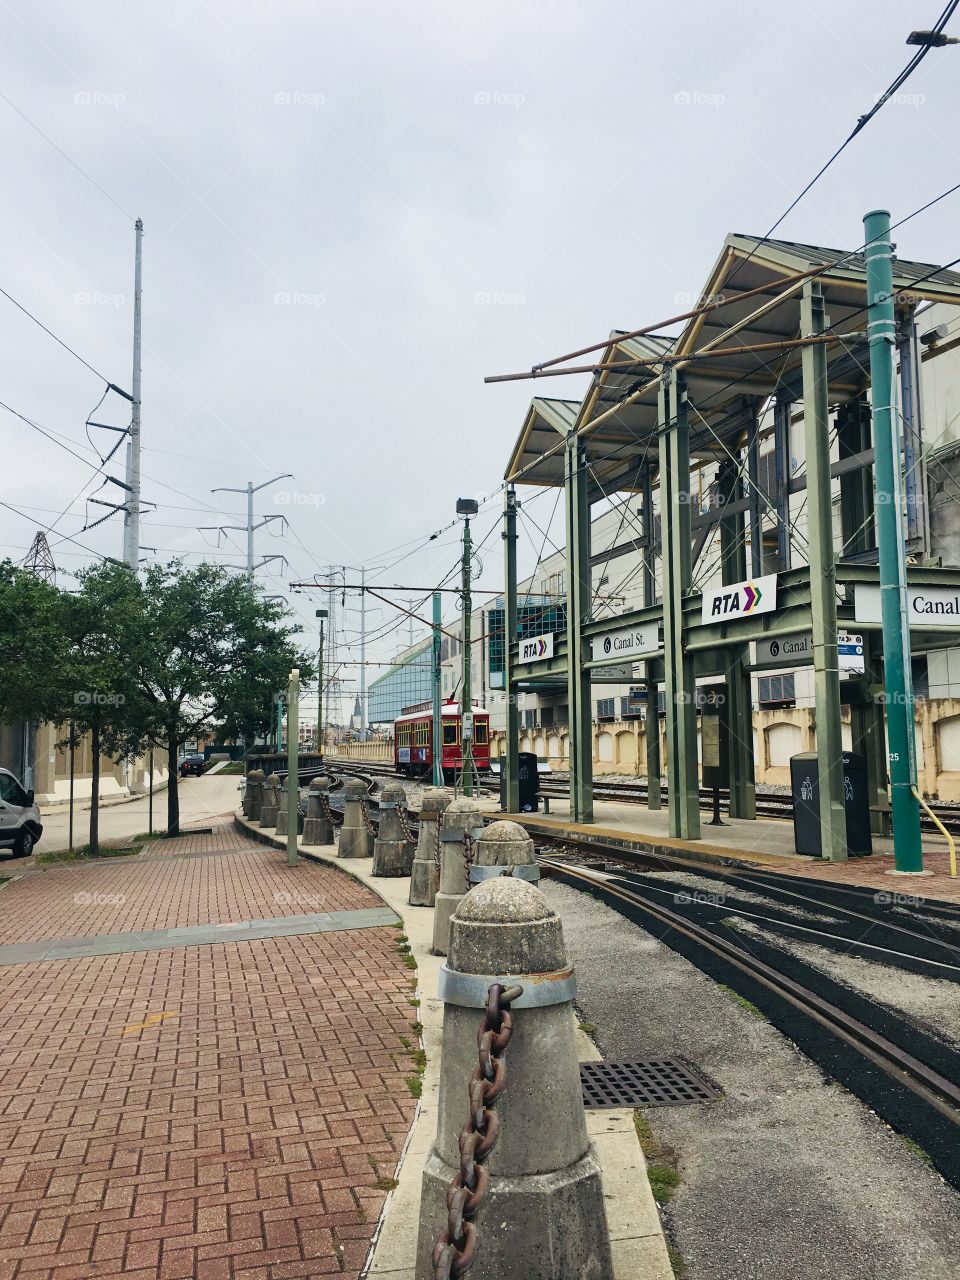 Trolly Station in New Orleans, Louisiana, USA